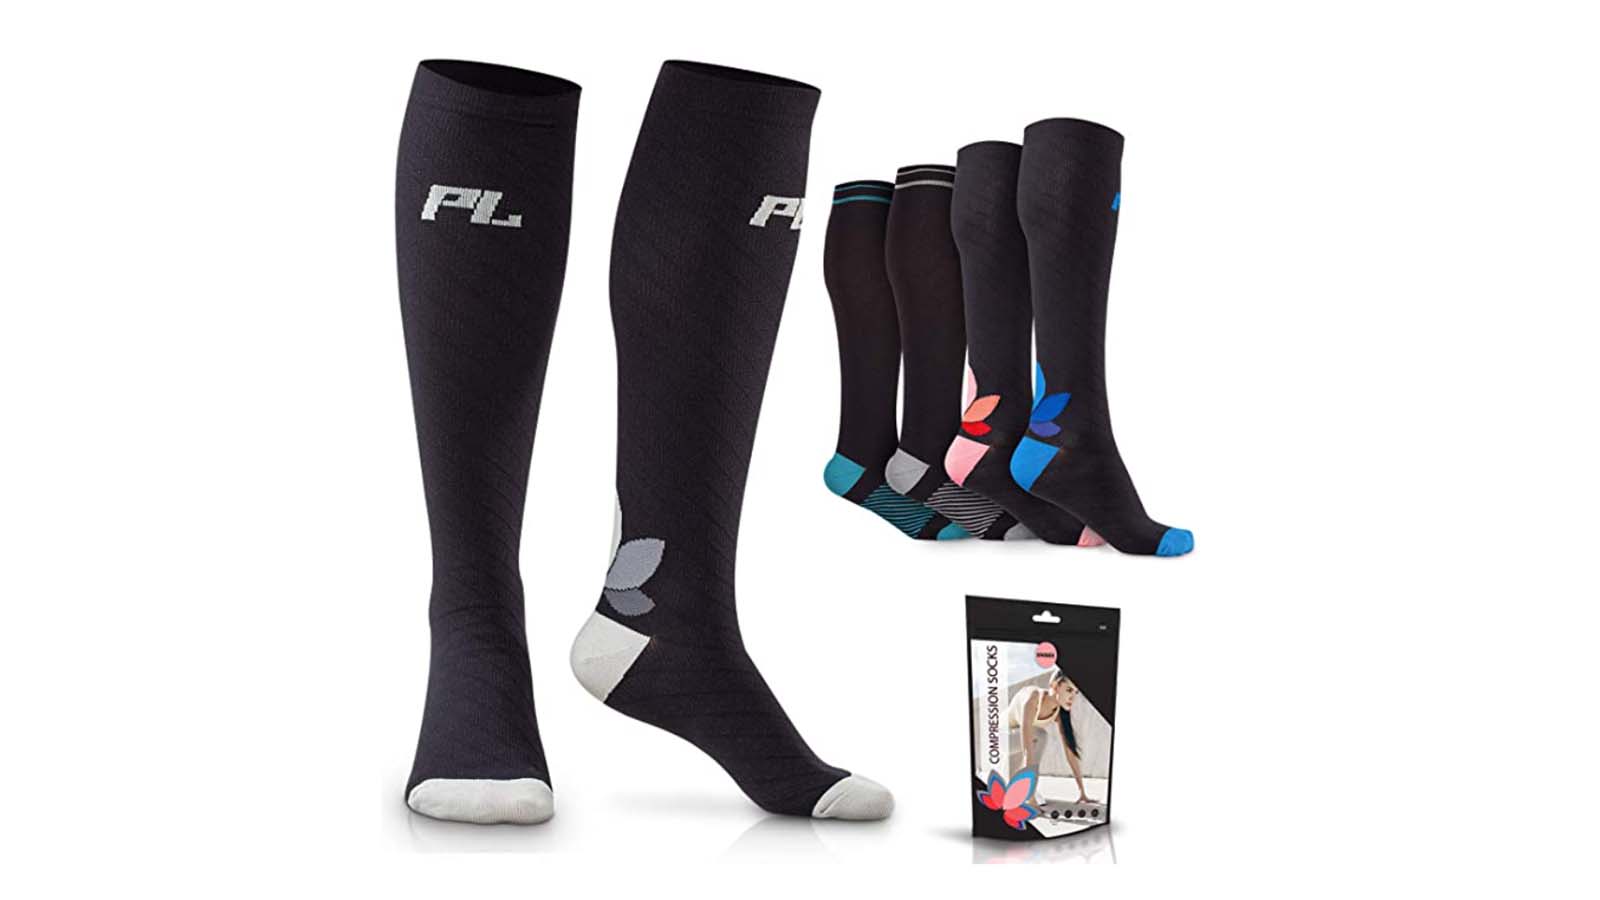 Compression Socks for Travel: What, Why, and How